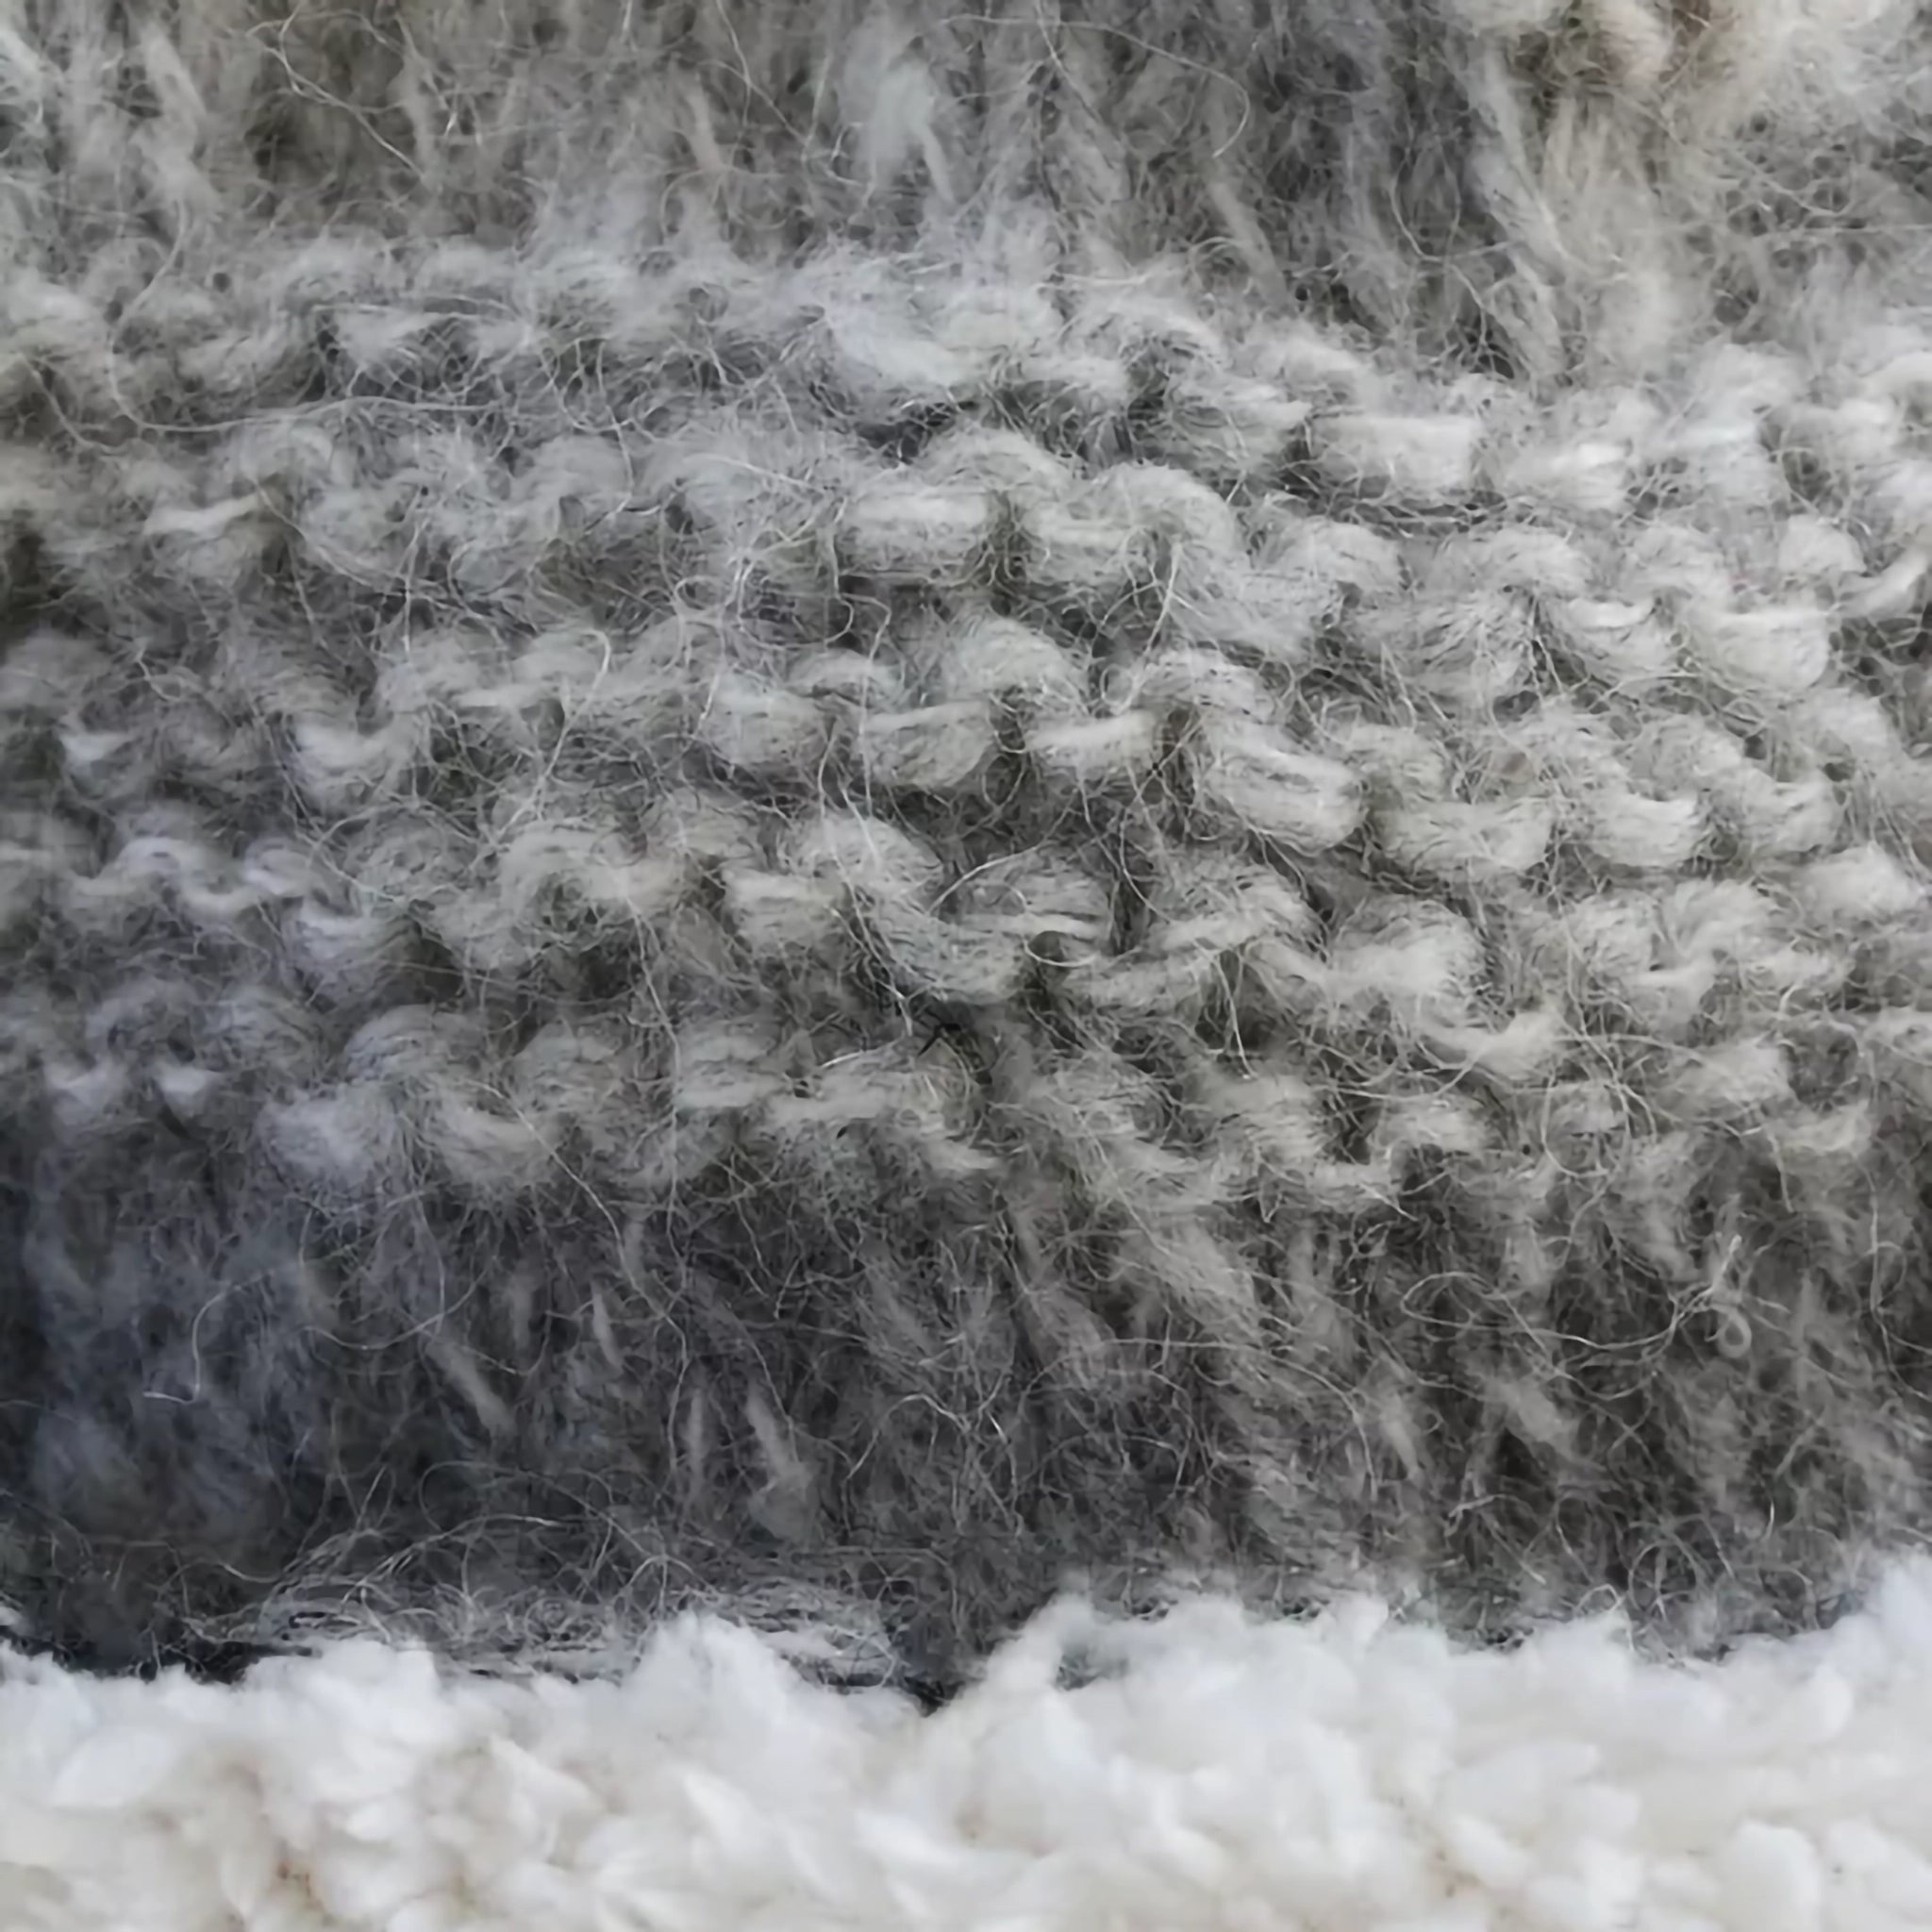 A grey ombre fluffy knitted pompom hat with button detail close-up detail